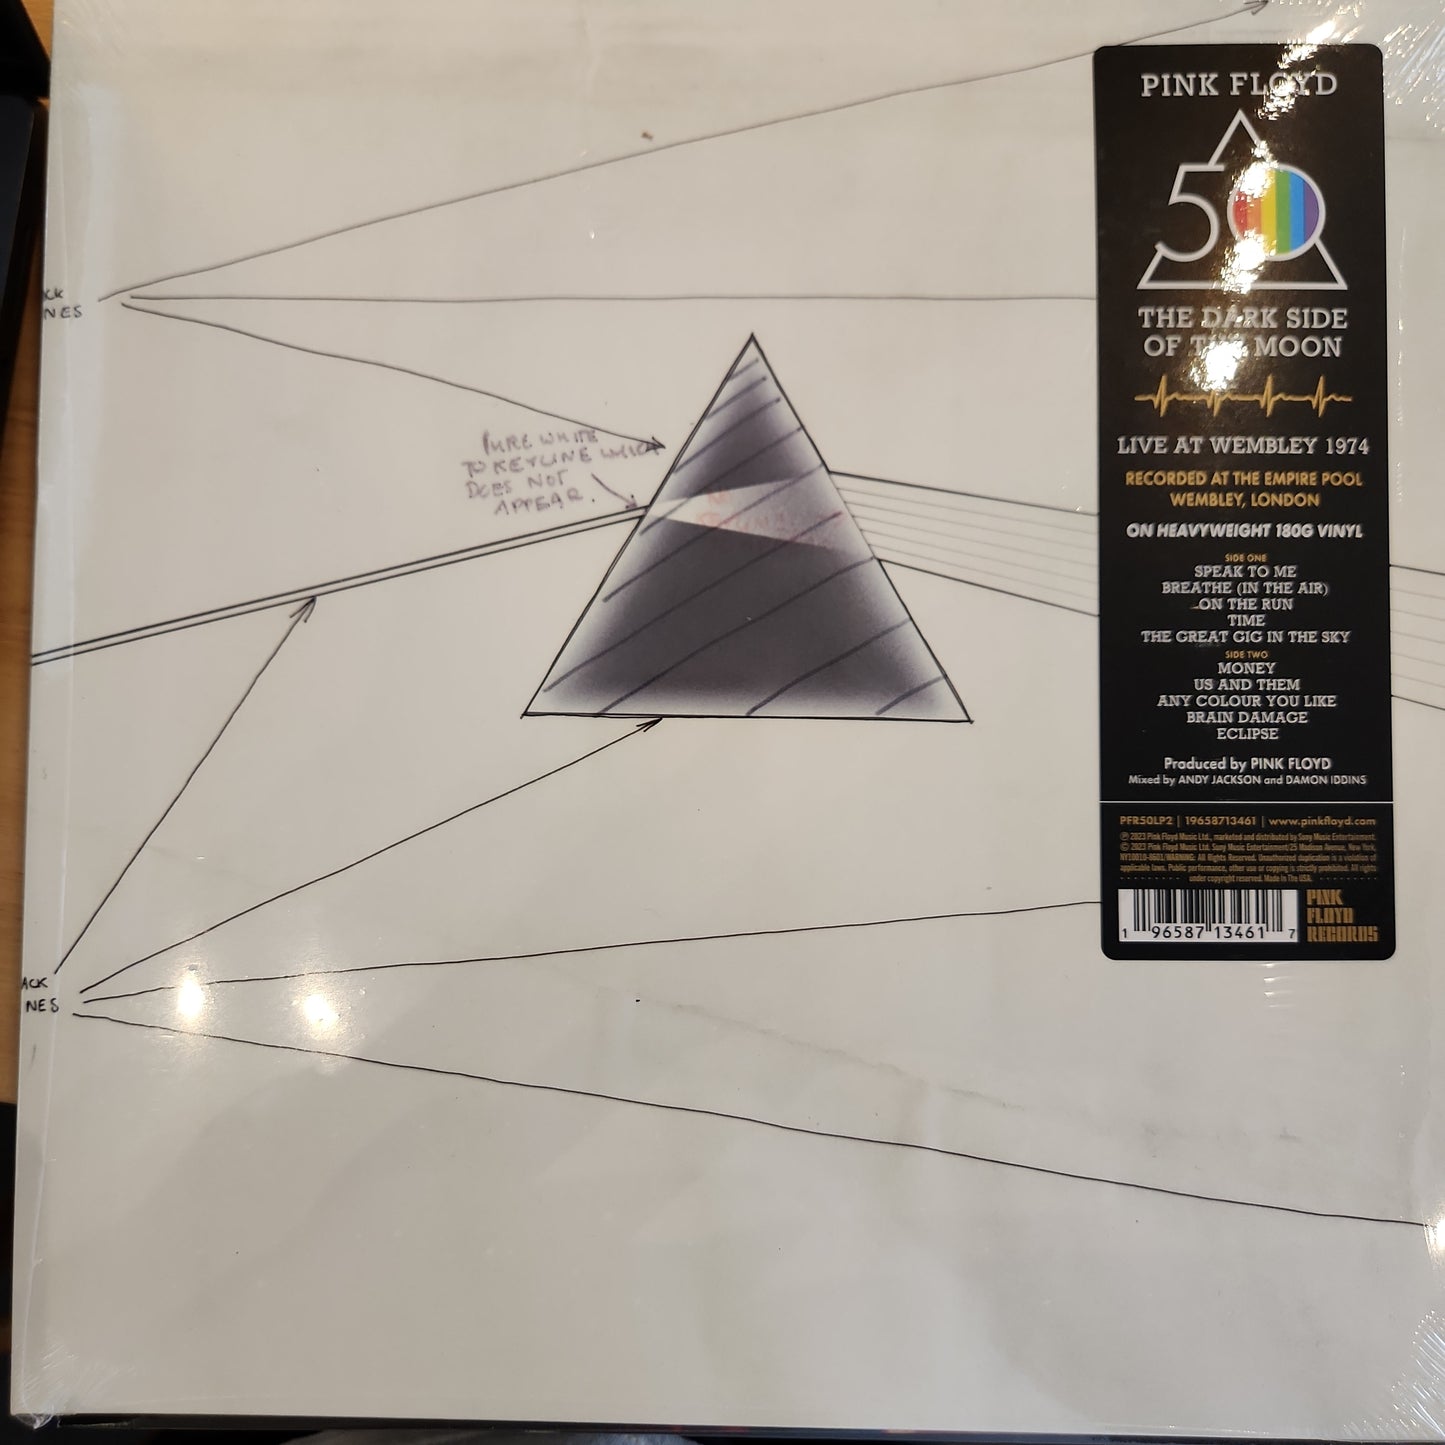 Pink Floyd - The Darkside of the Moon: Live from Wembley - Vinyl LP